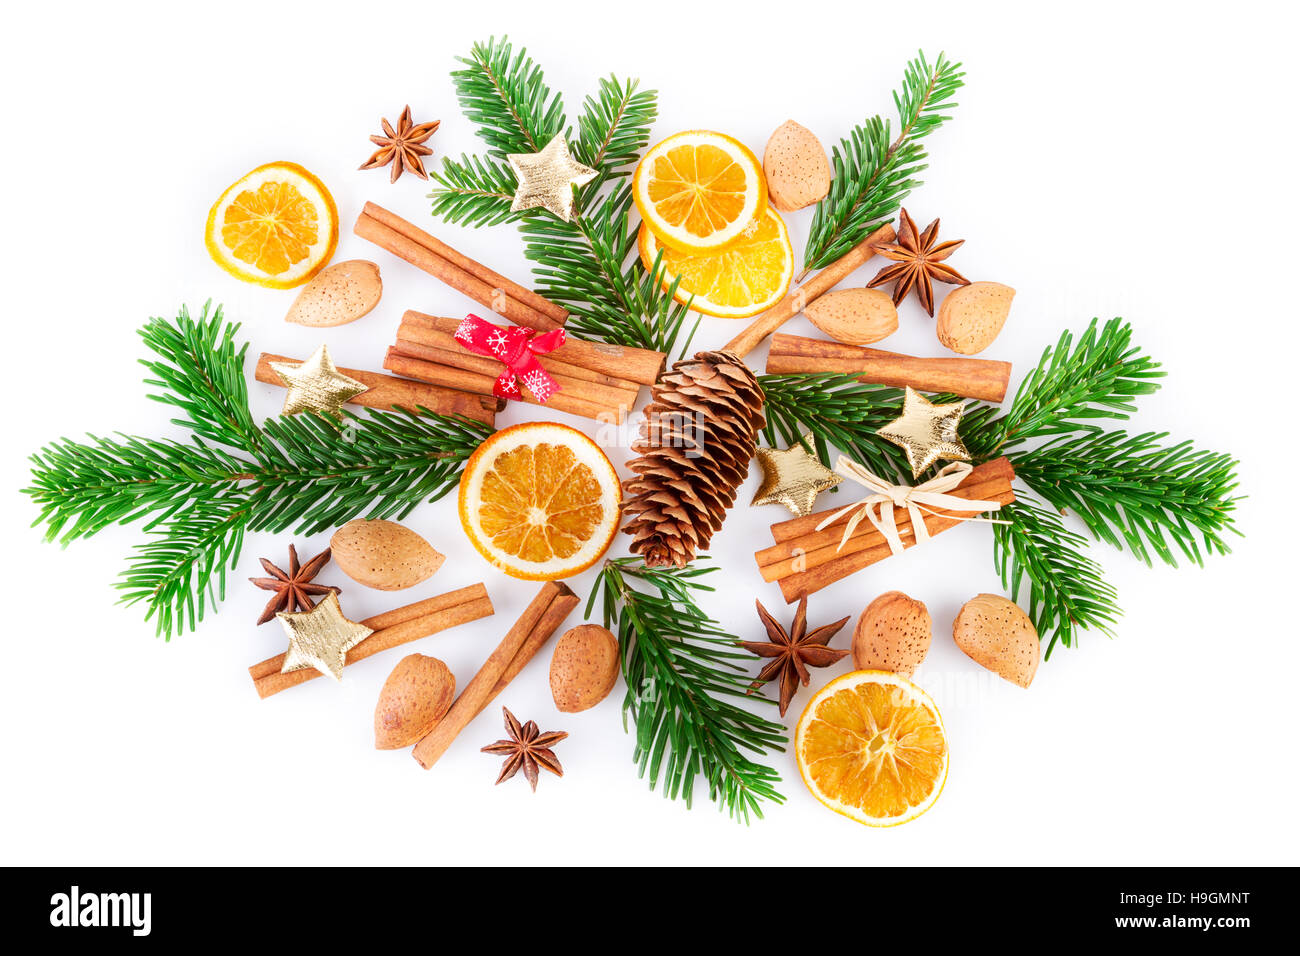 Christmas spices arrangement on white background. Flat lay, top view. Stock Photo